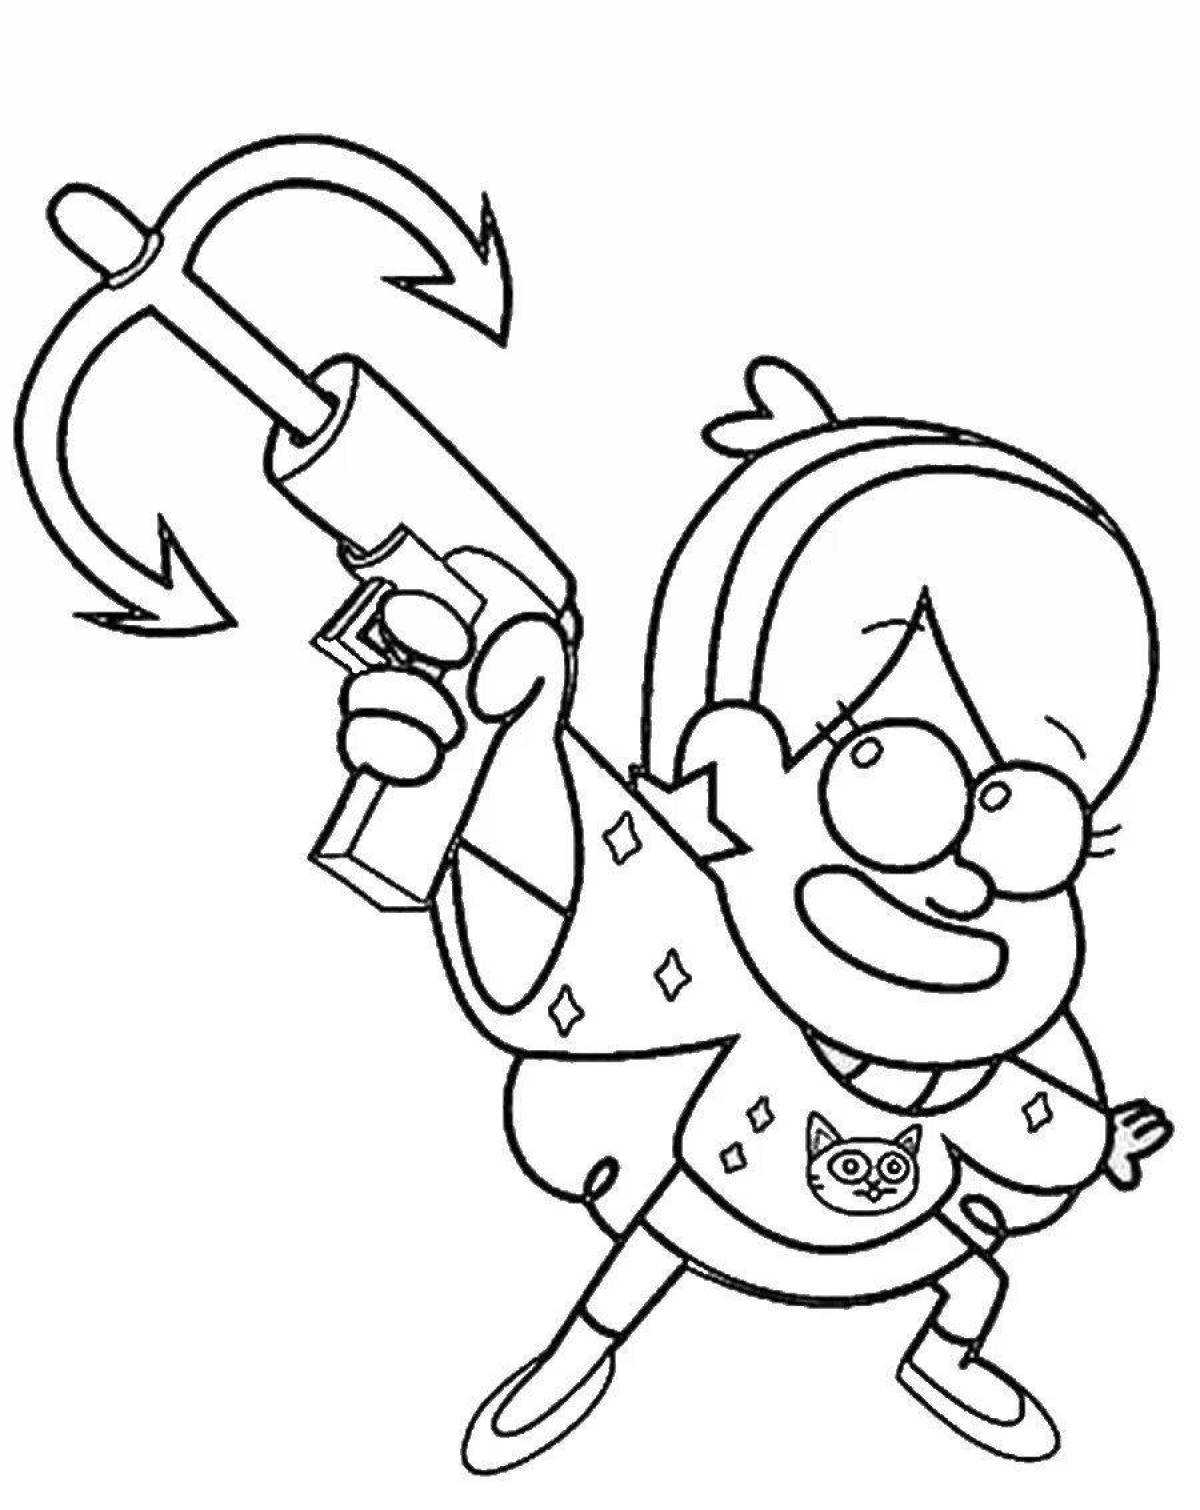 Animated Gravity Falls Mabel Coloring Page